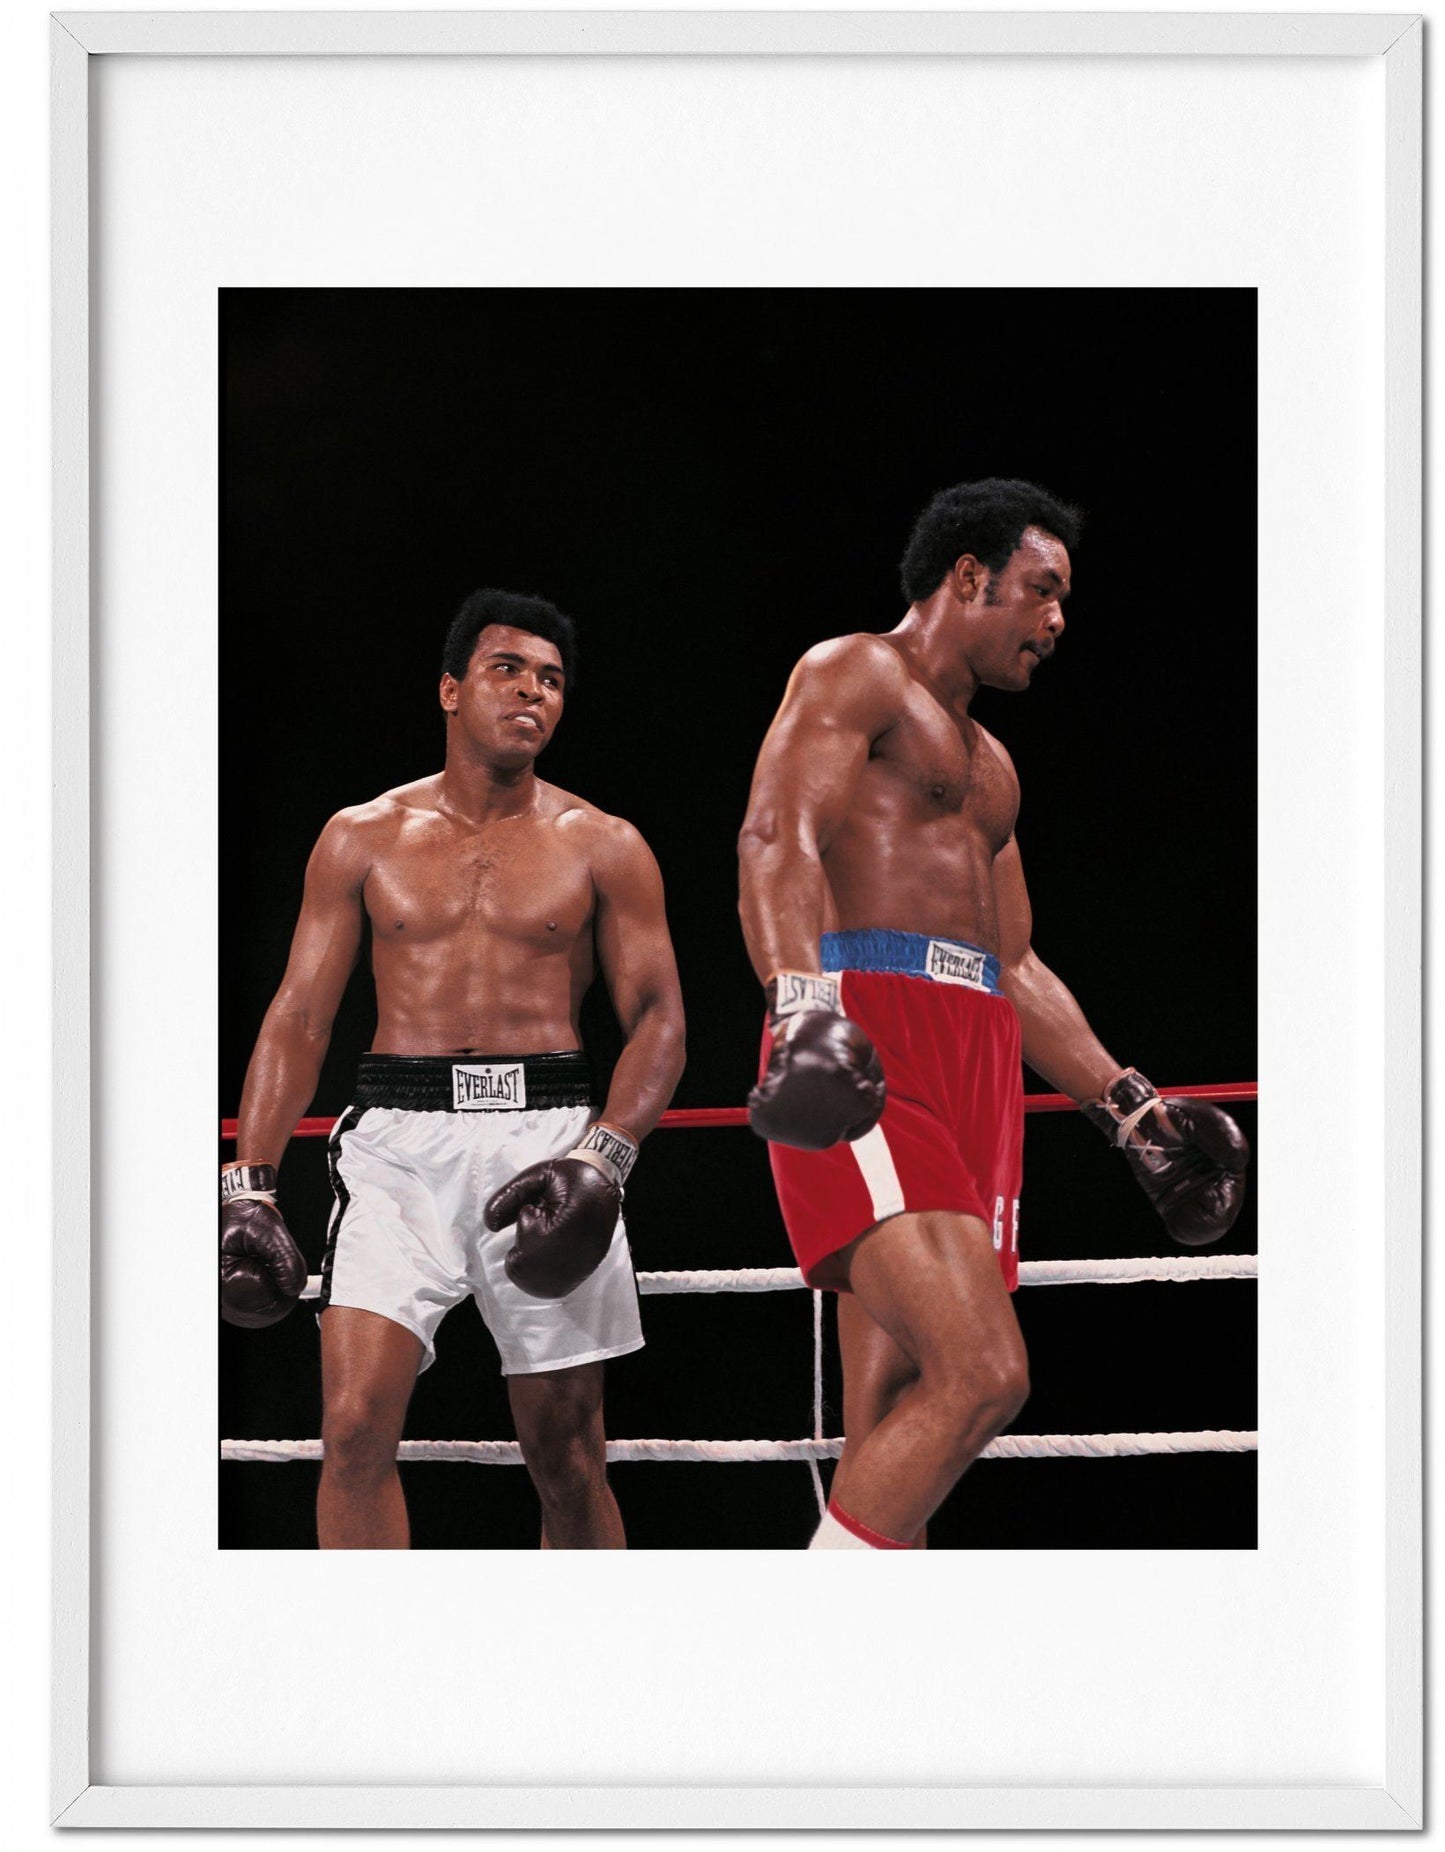 Norman Mailer. The Fight, Art Edition No. 1–125